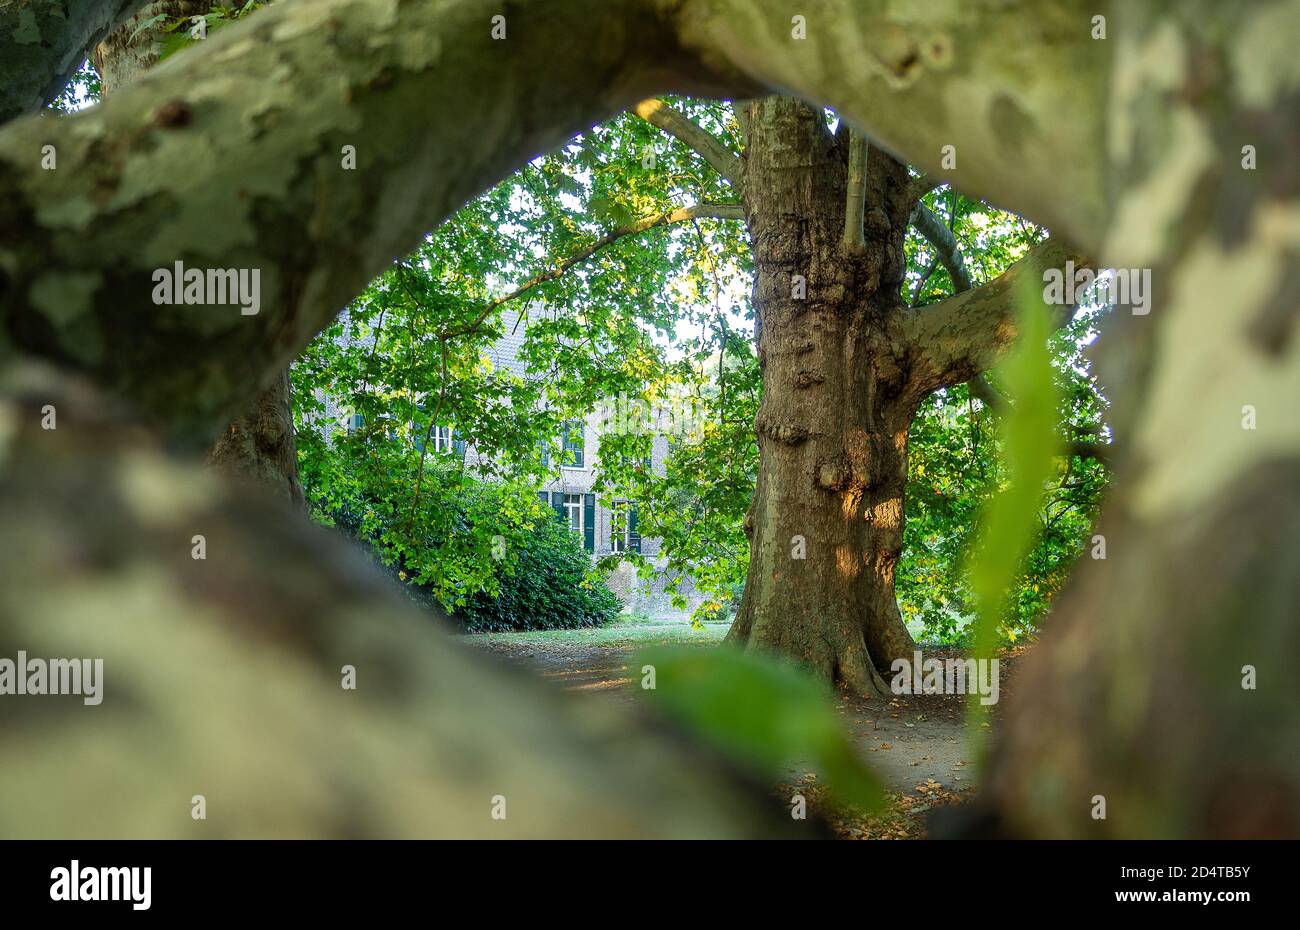 A castle in Geldrop Noord-Brabant Holland look through a tree Stock Photo